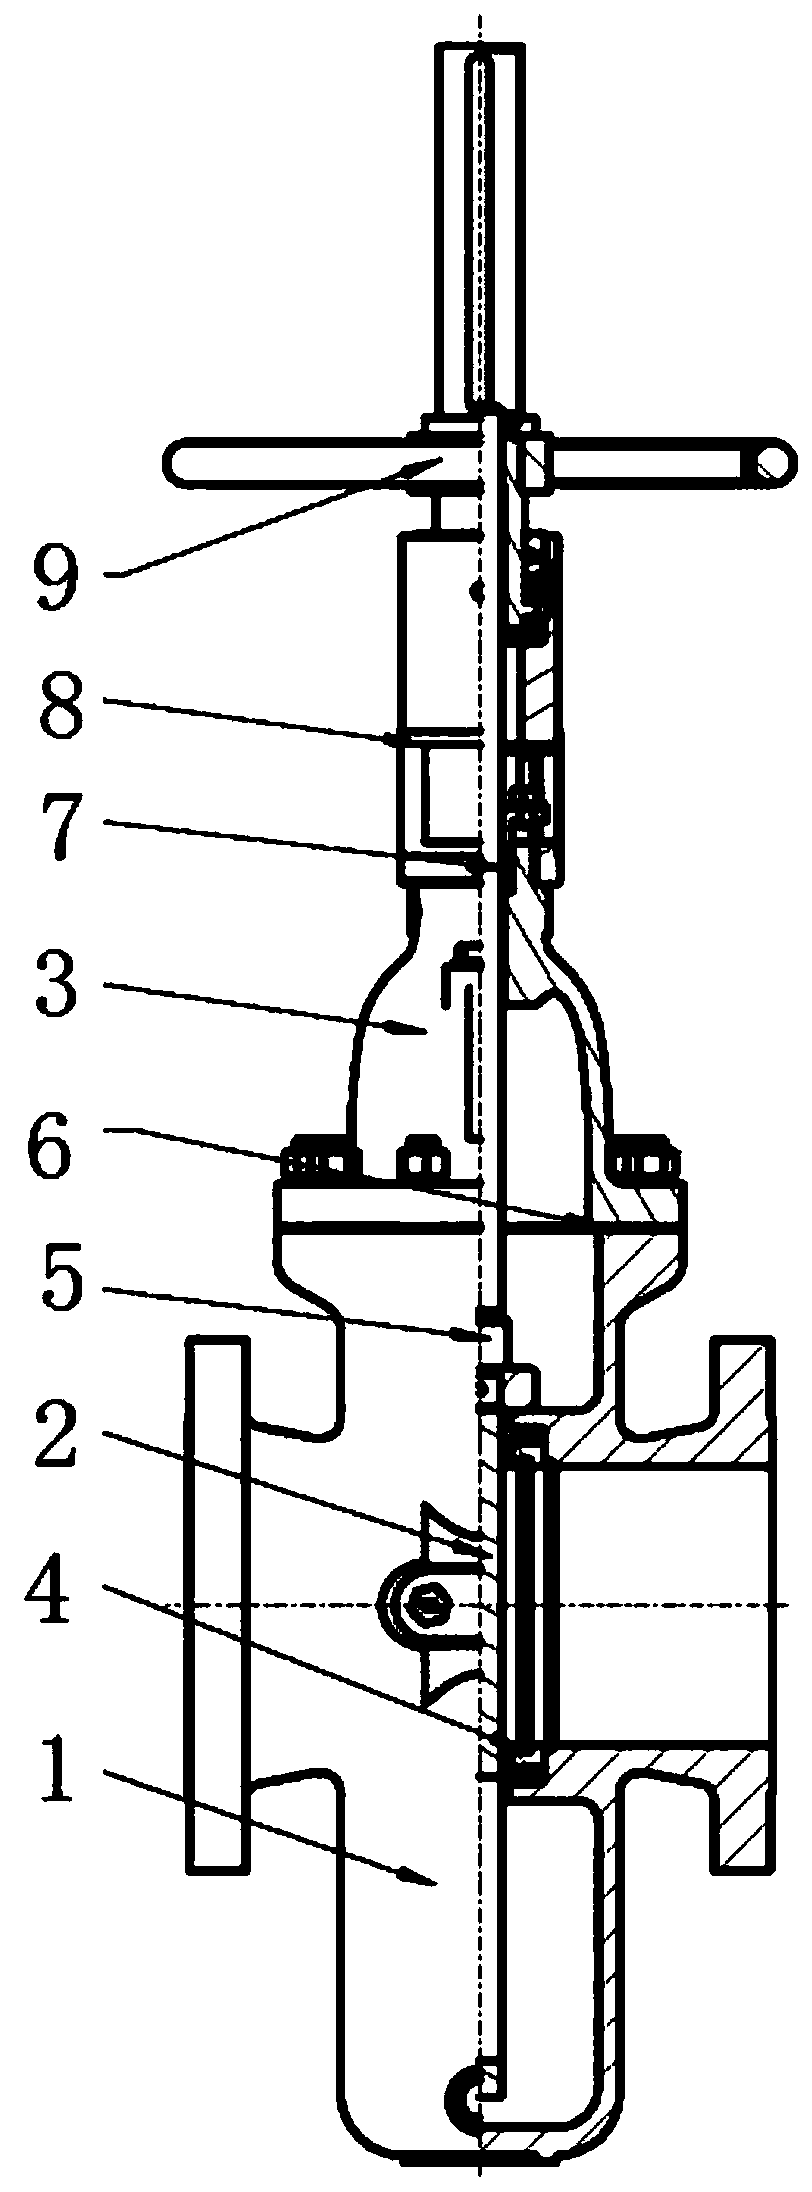 Flat gate valve with compound seal valve seat structure